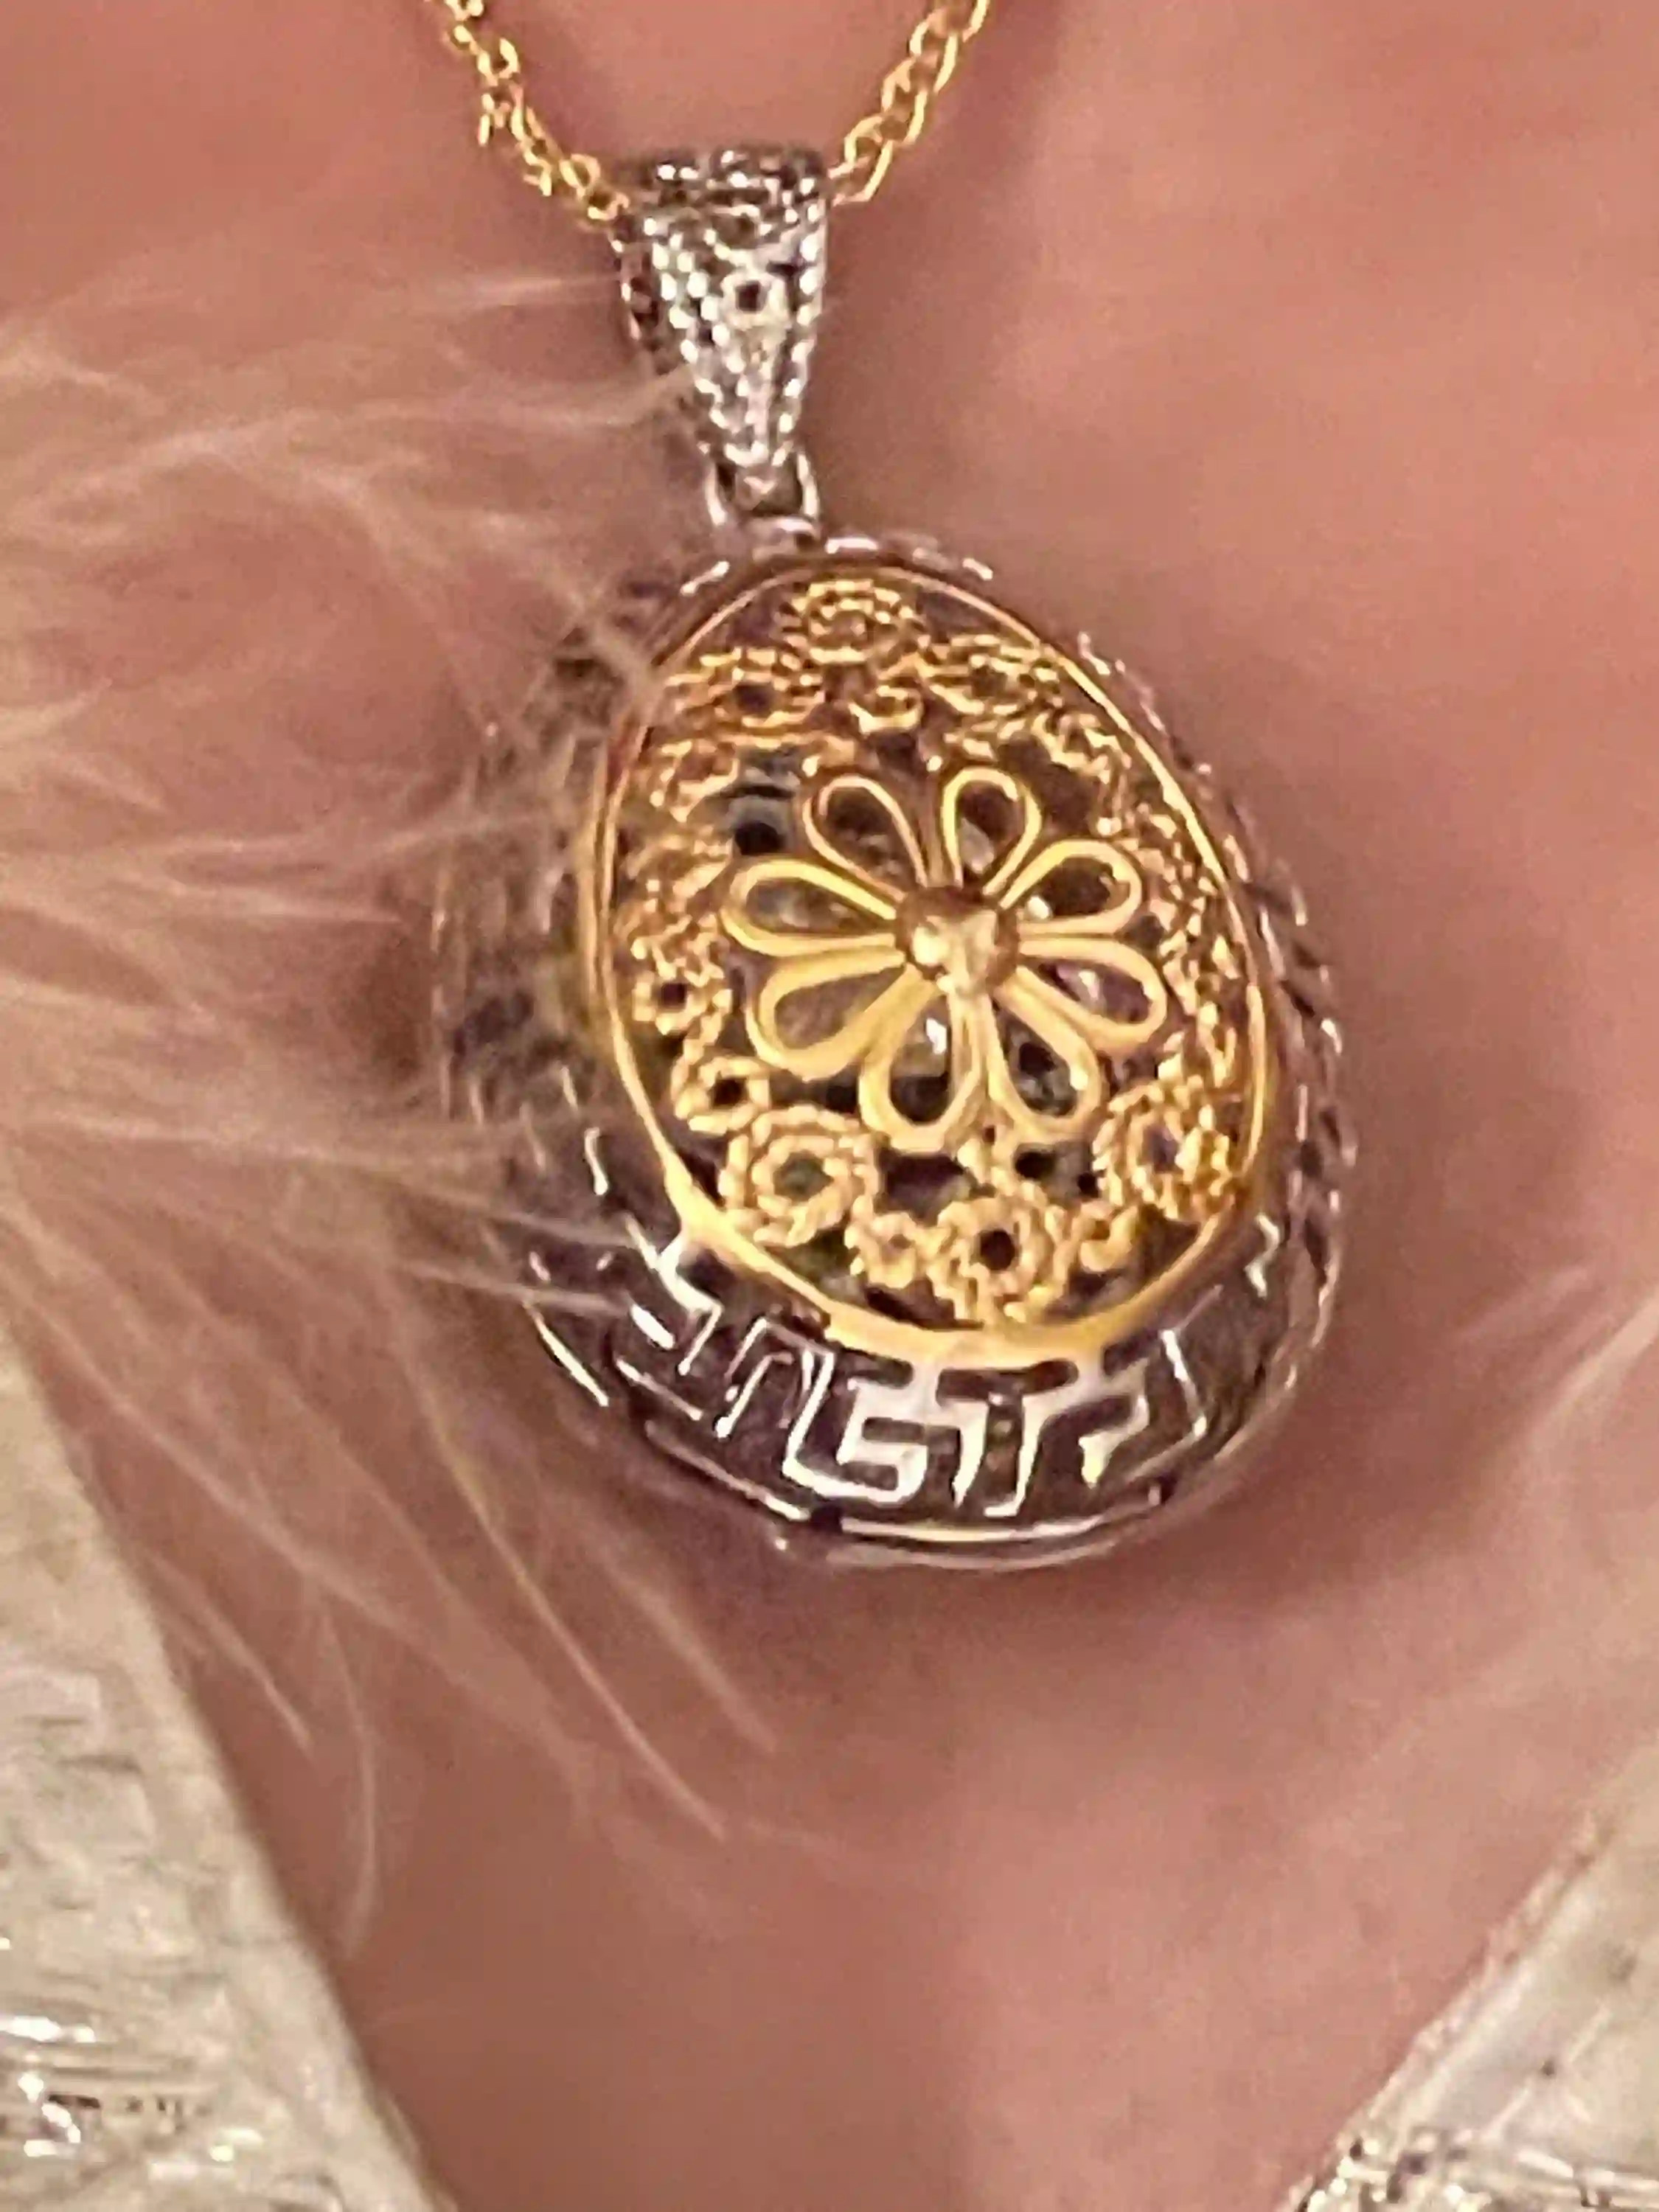 3ct LARGE Gold Diamond Flower Necklace Faberge Egg pendant Sterling Silver SOLID PLATINUM Faberge Egg style Birthday Diamond Neckless 1.6